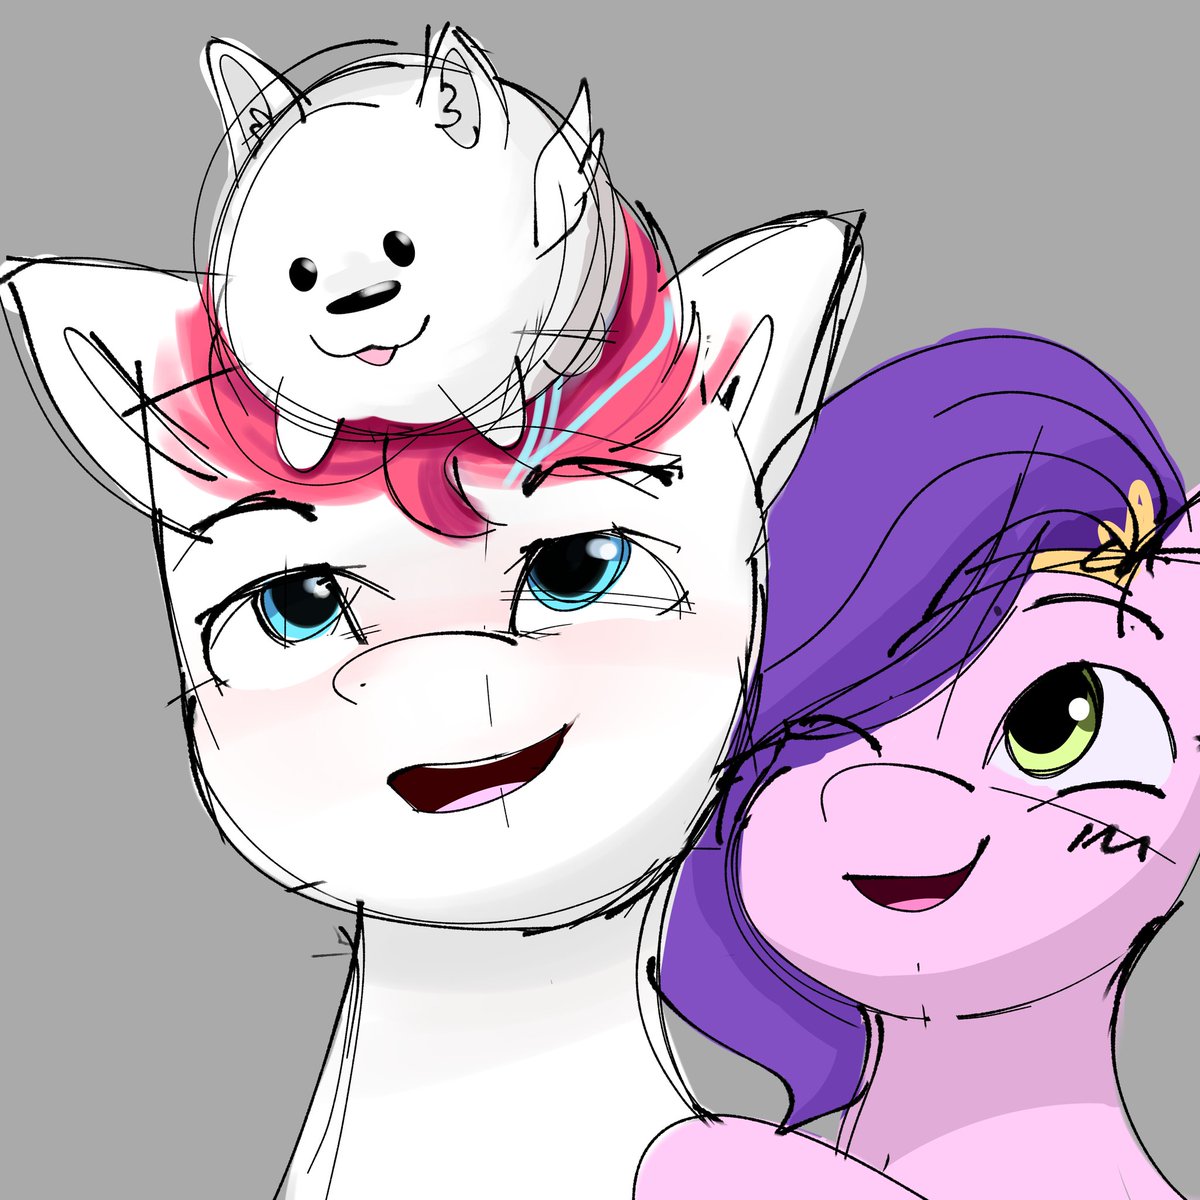 Just a normal time for the royal sibling 

#mylittlepony #mlp #g5mlp #mlpg5 #pipppetals #zippstorm